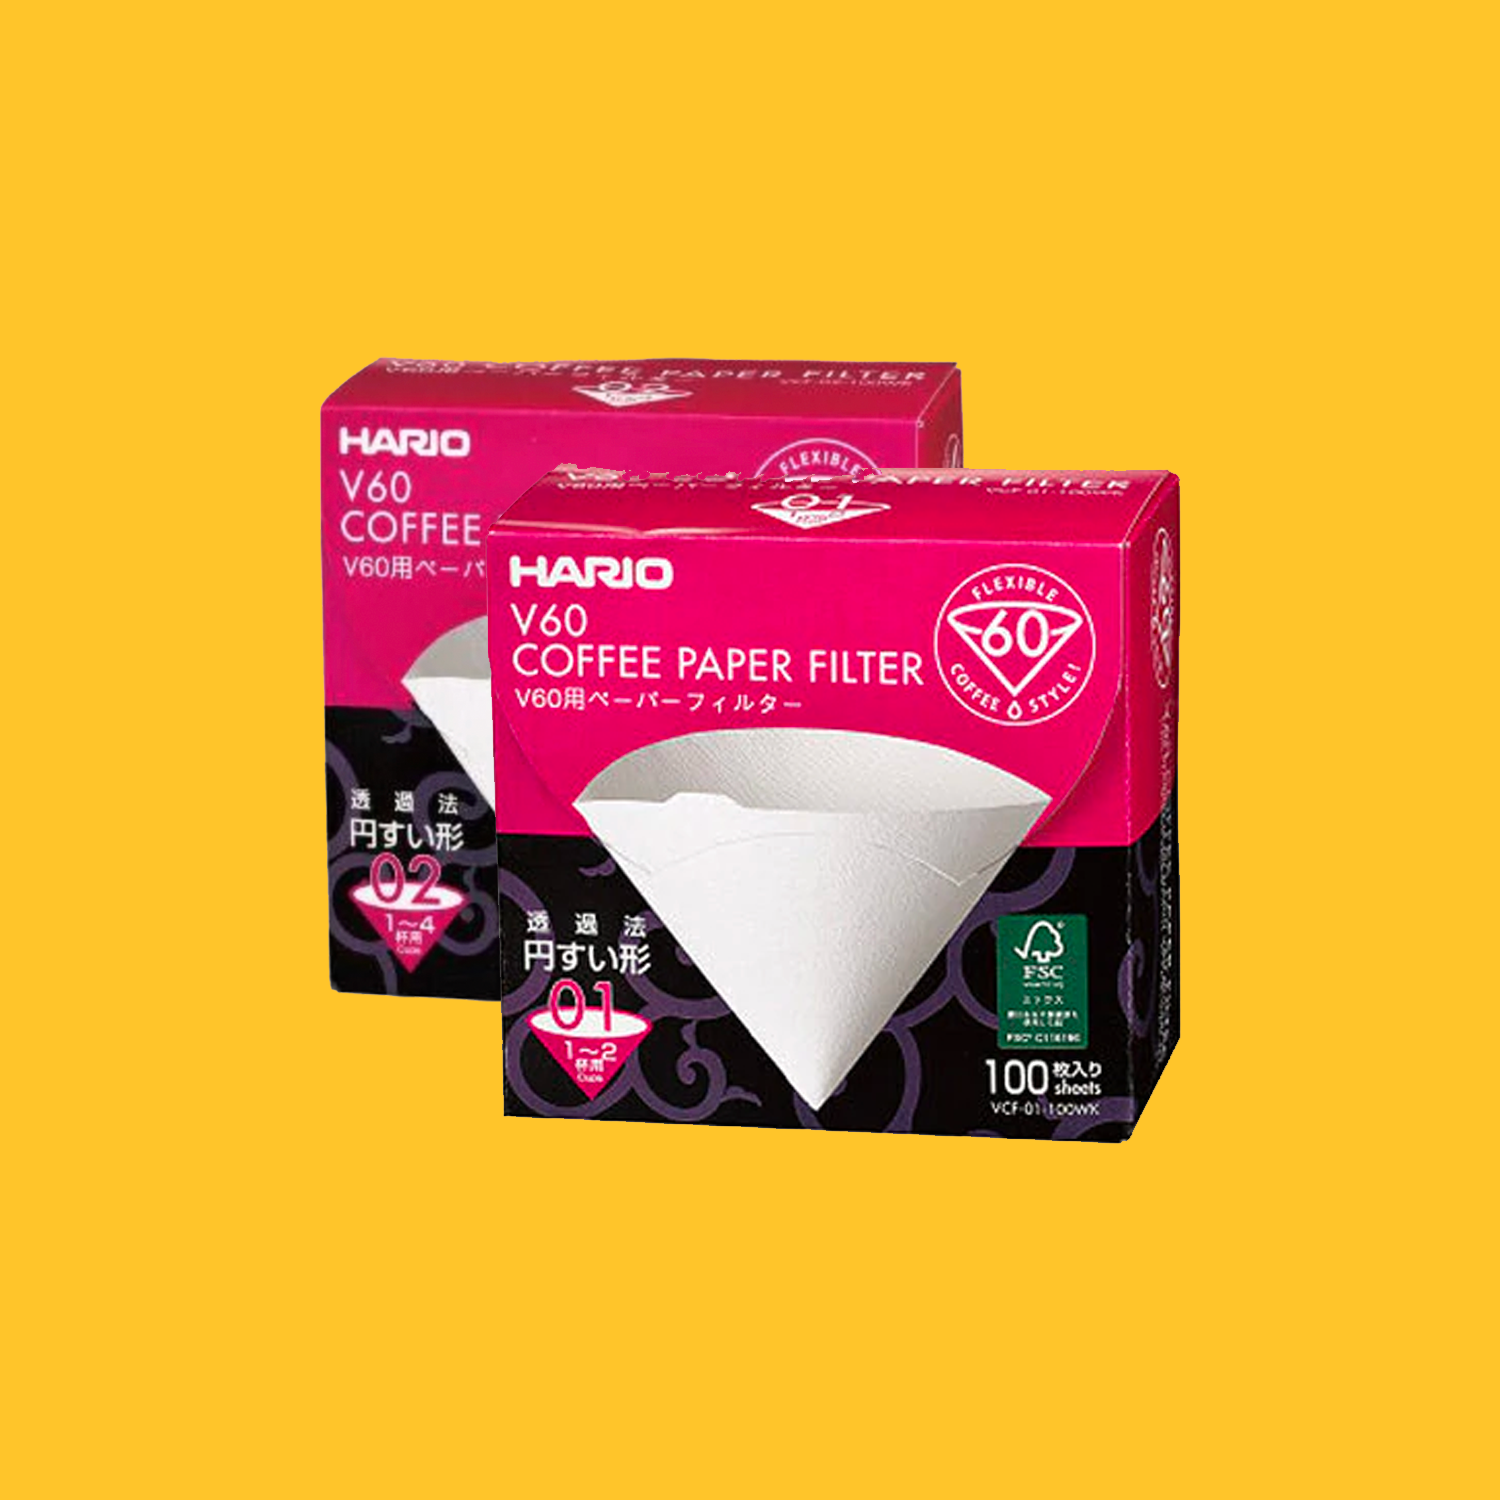 Hario v60 Filter Papers